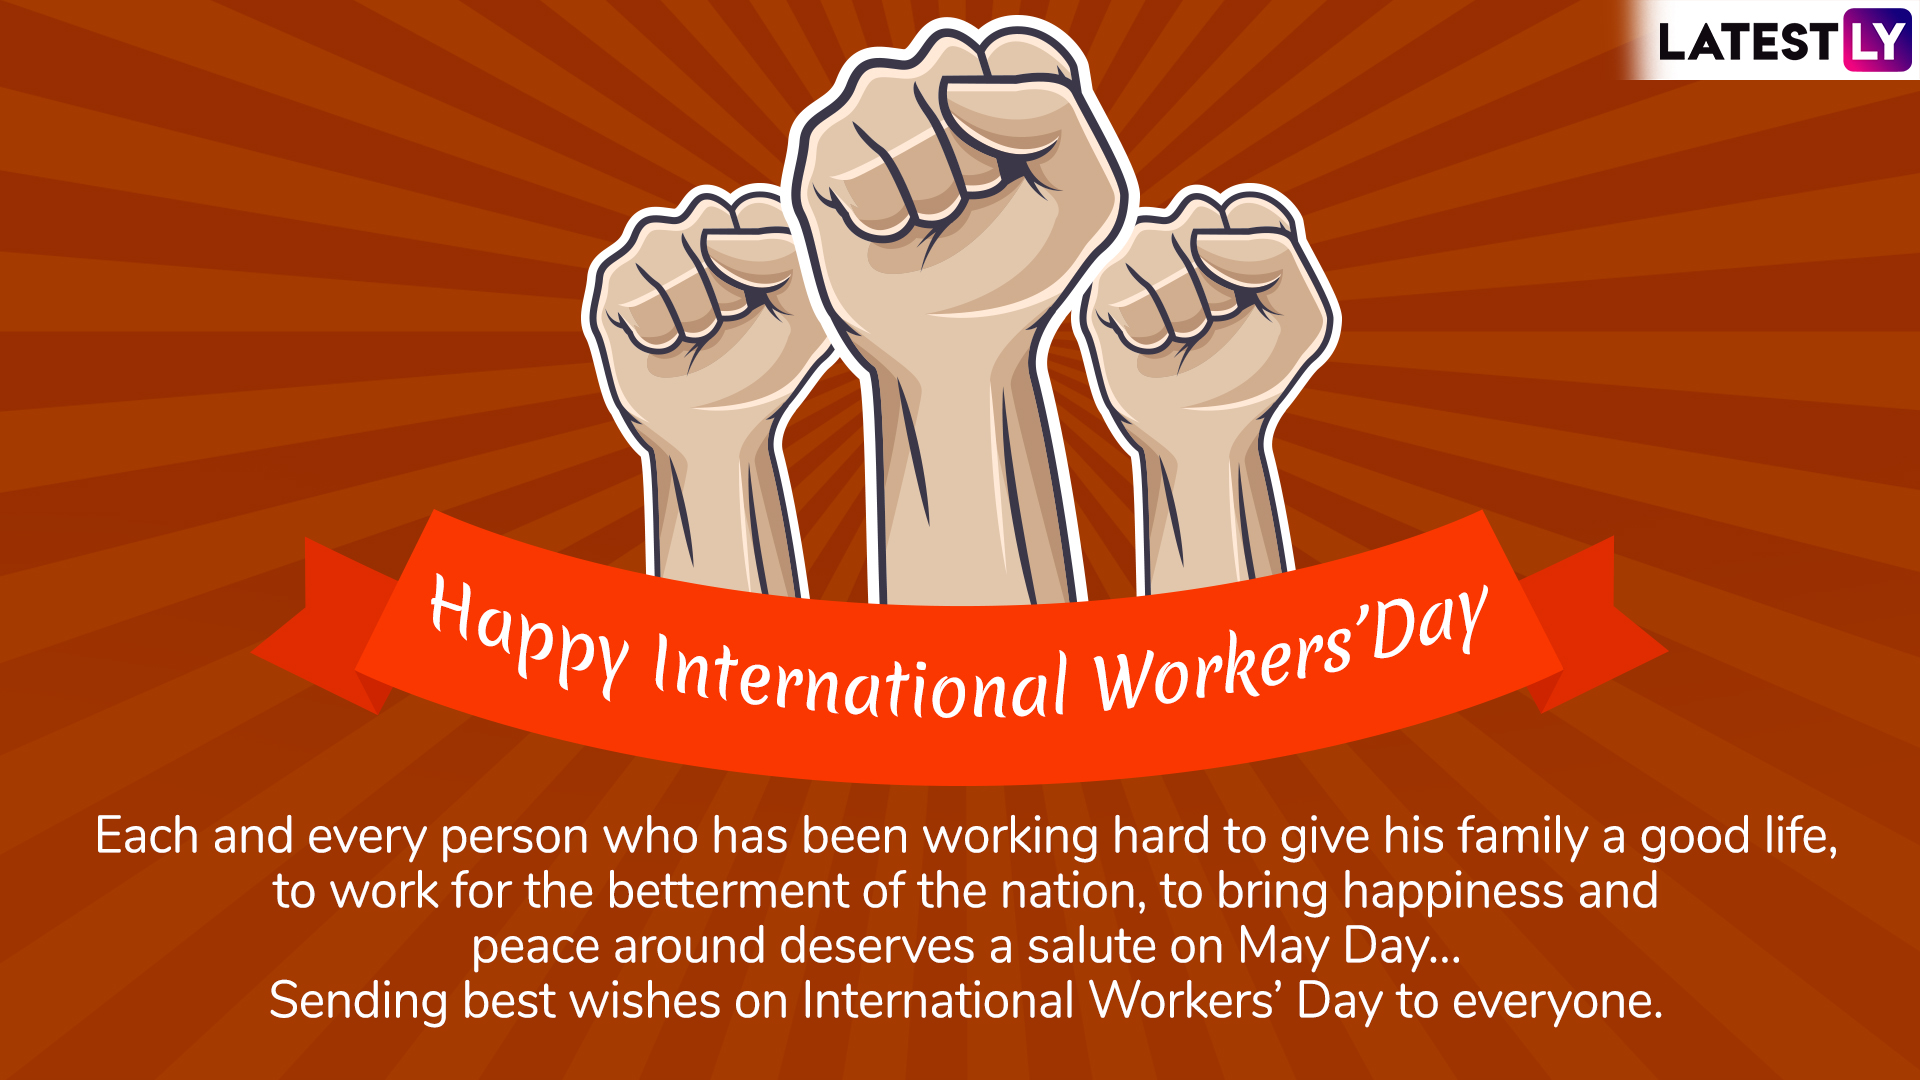 International Workers' Day 2019 Wishes & Quotes WhatsApp